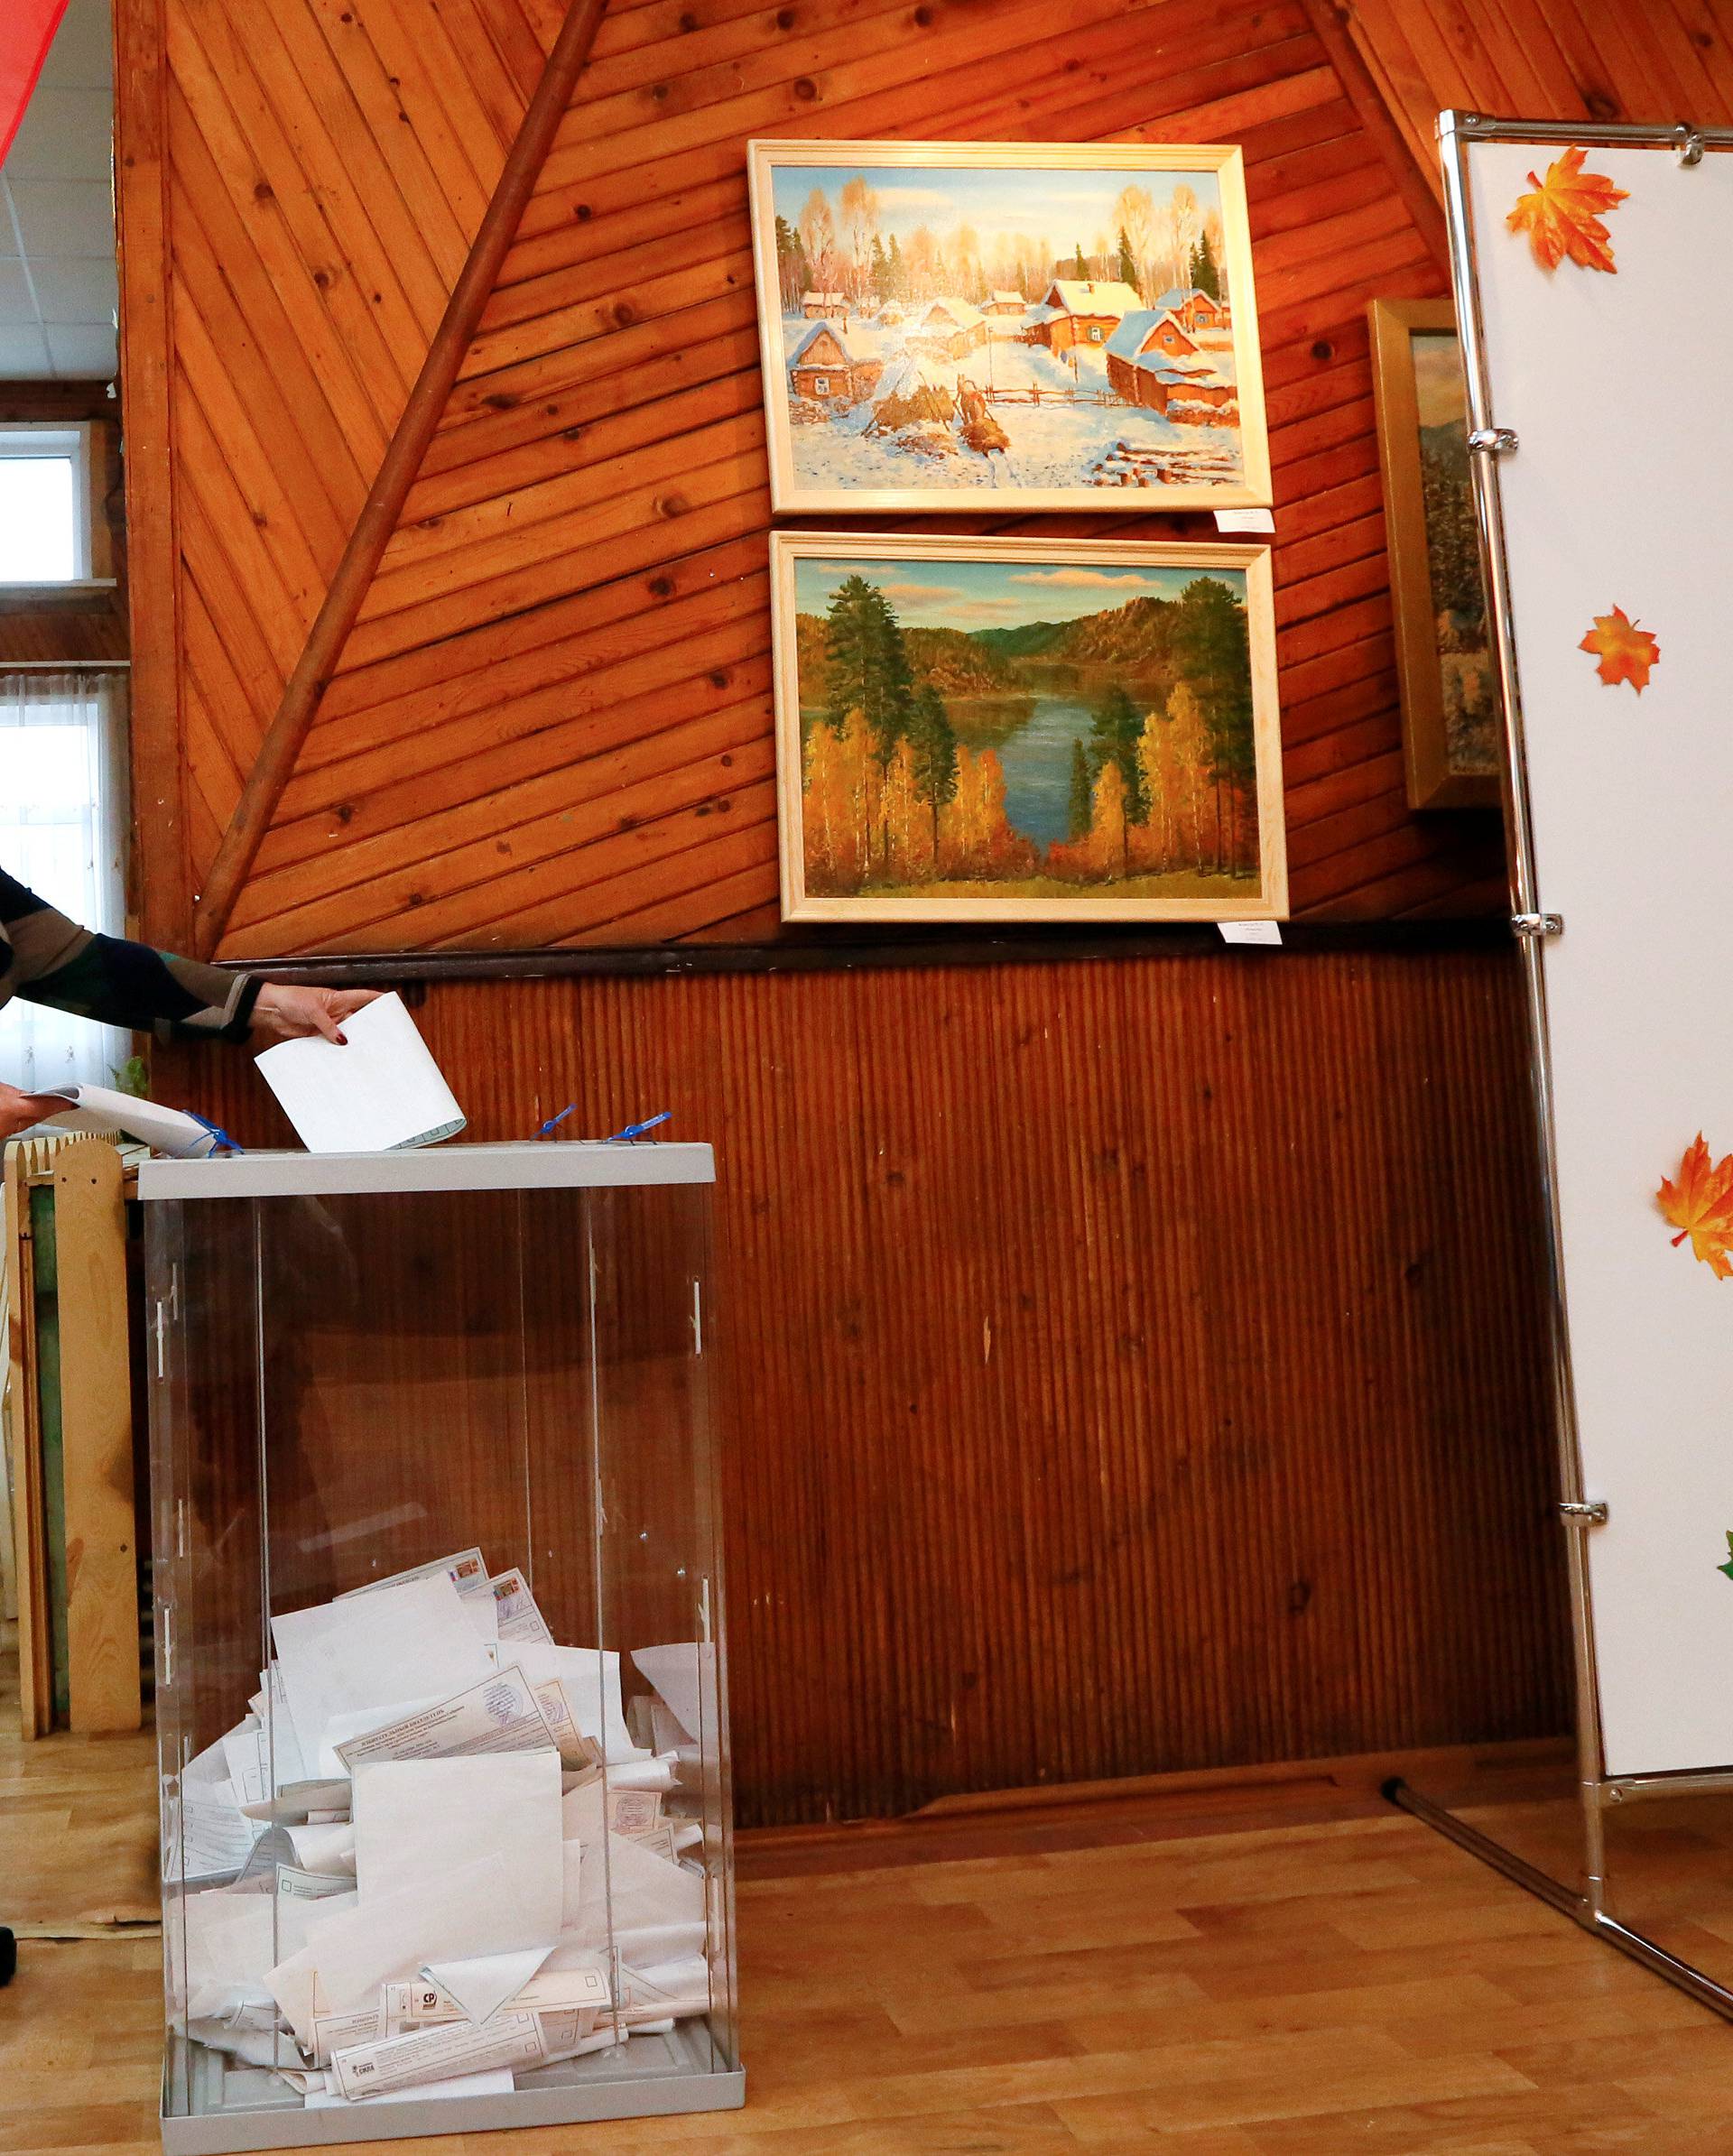 Woman casts her ballot at polling station during parliamentary election in Krasnoyarsk region